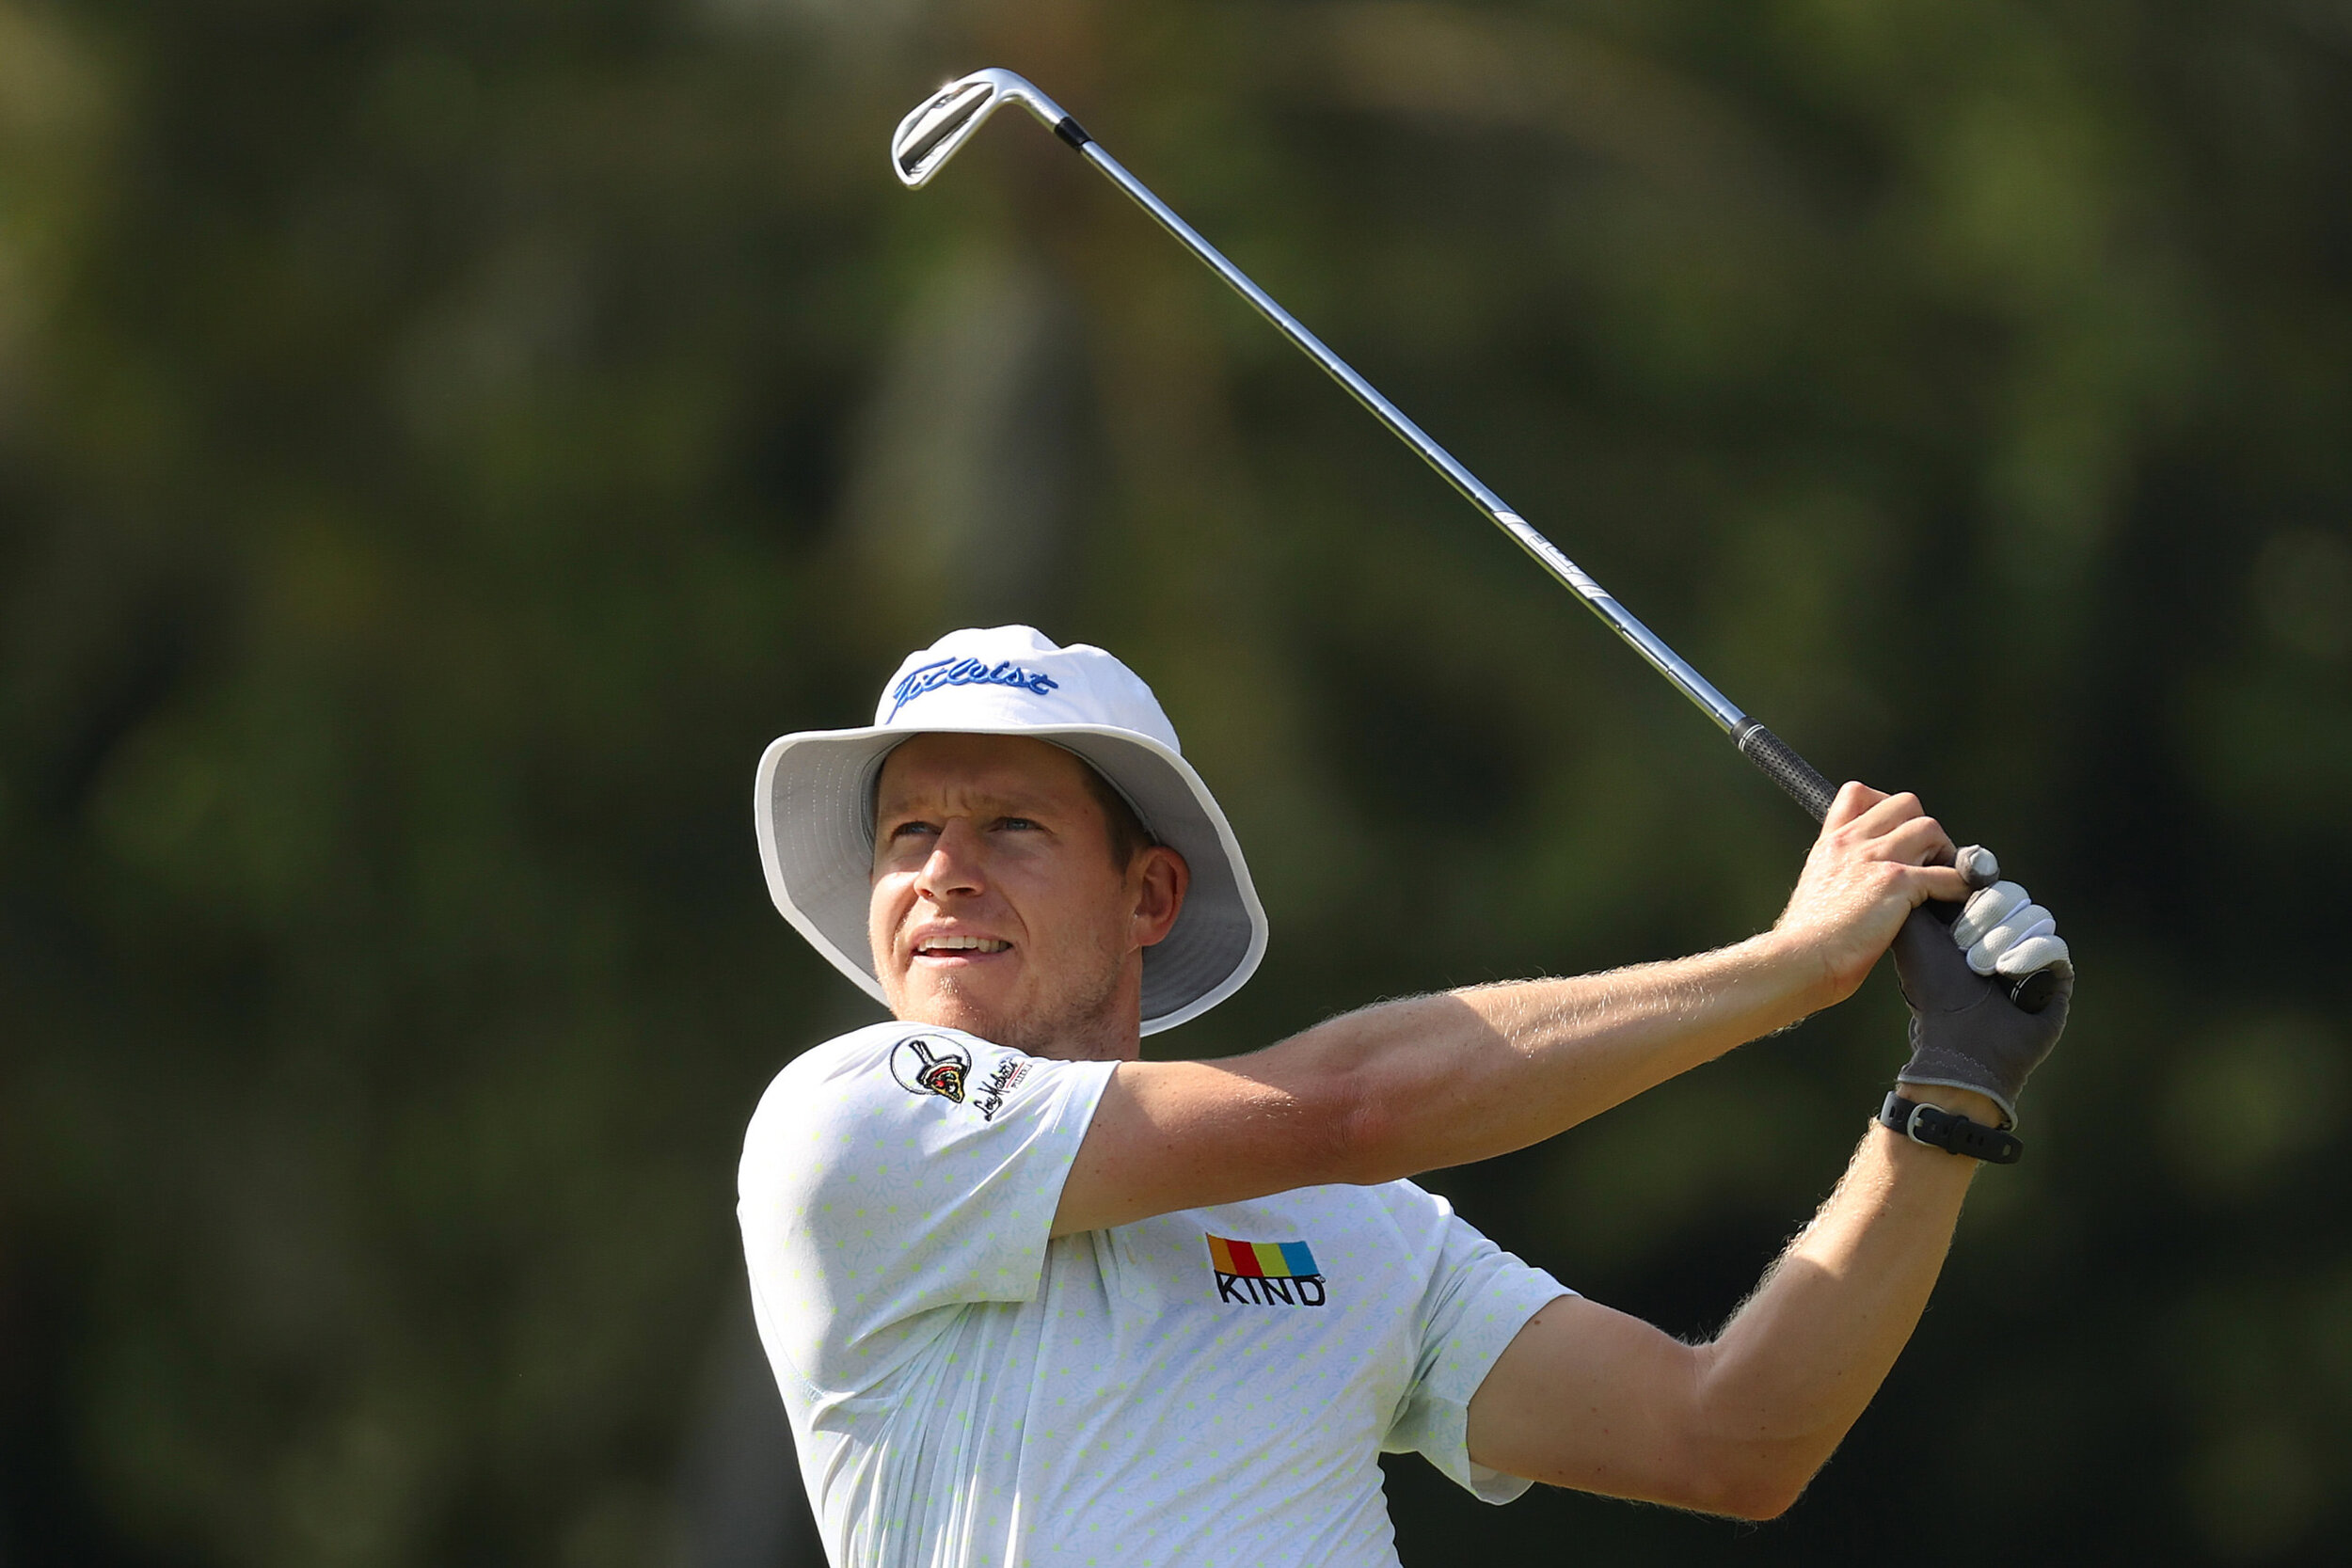  HONOLULU, HAWAII - JANUARY 15: Peter Malnati of the United States plays his shot from the 11th tee during the second round of the Sony Open in Hawaii at the Waialae Country Club on January 15, 2021 in Honolulu, Hawaii. (Photo by Gregory Shamus/Getty